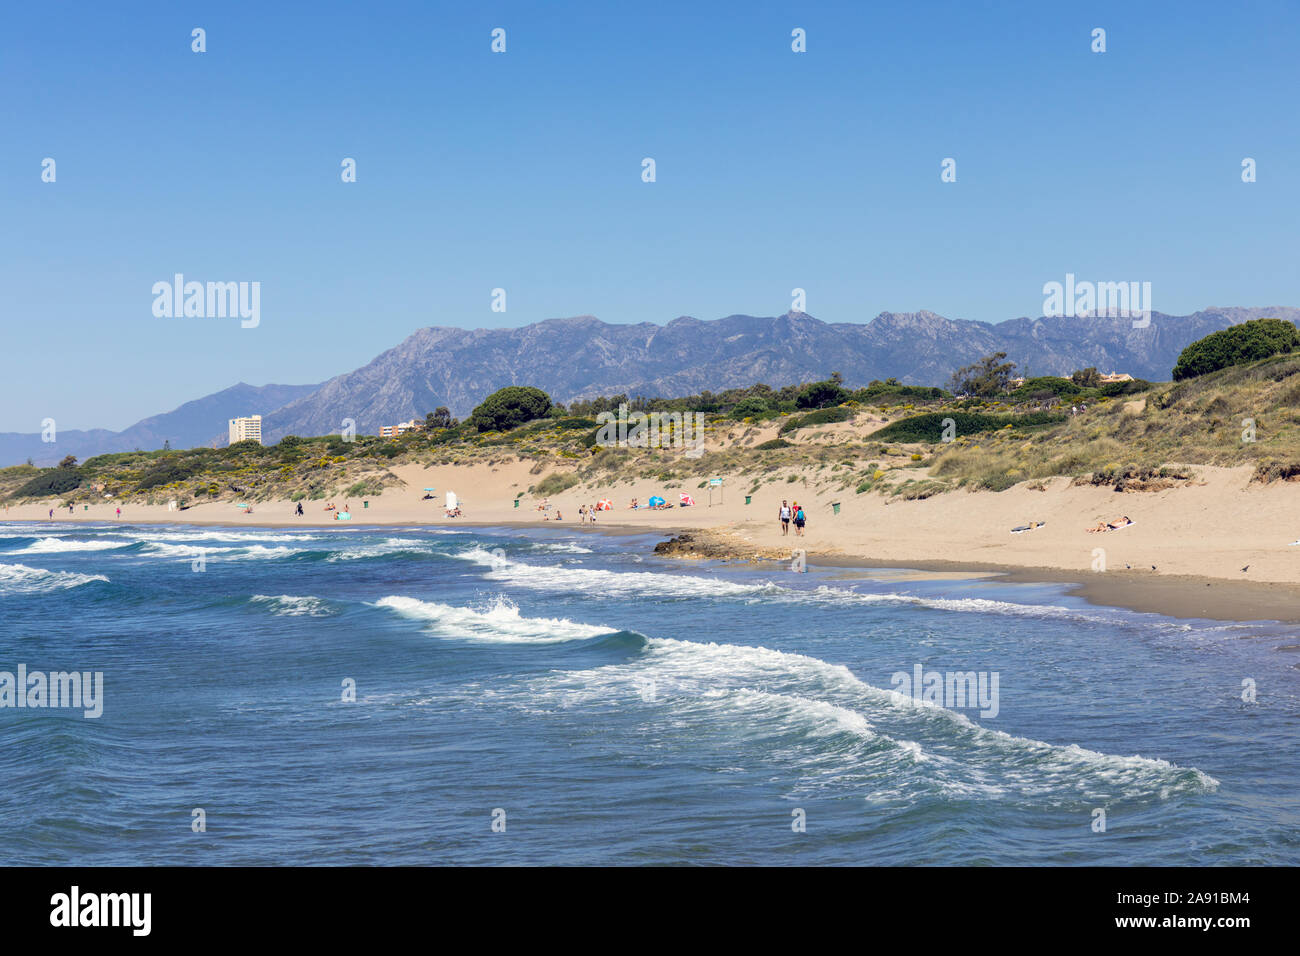 Beach at Dunas de Artola, also known as Dunas de Cabopino.  The dunas, or dunes, are designated as a Natural Monument and are protected.  At Cabopino, Stock Photo